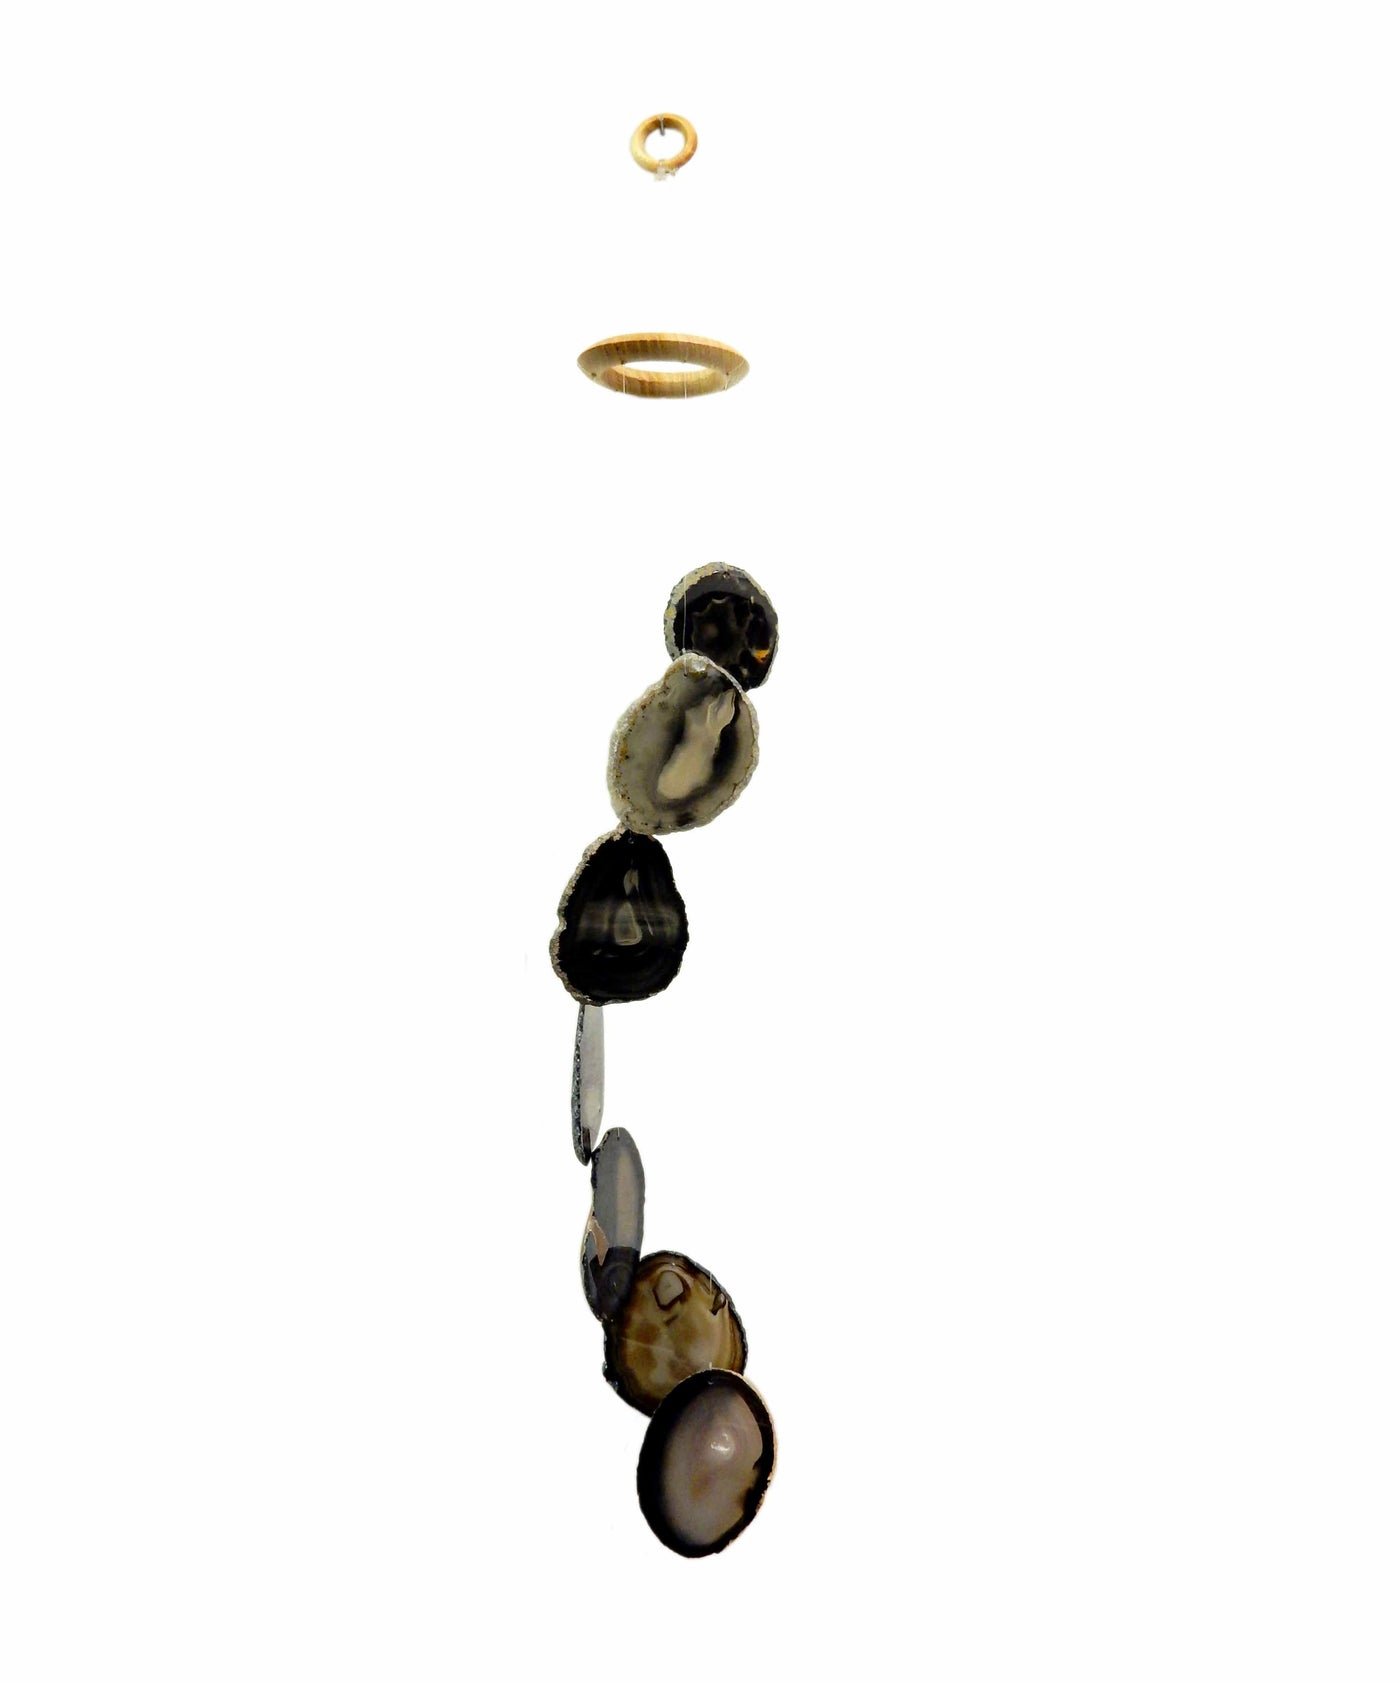 Picture of our black agate windchime hanging, displayed on a white background.